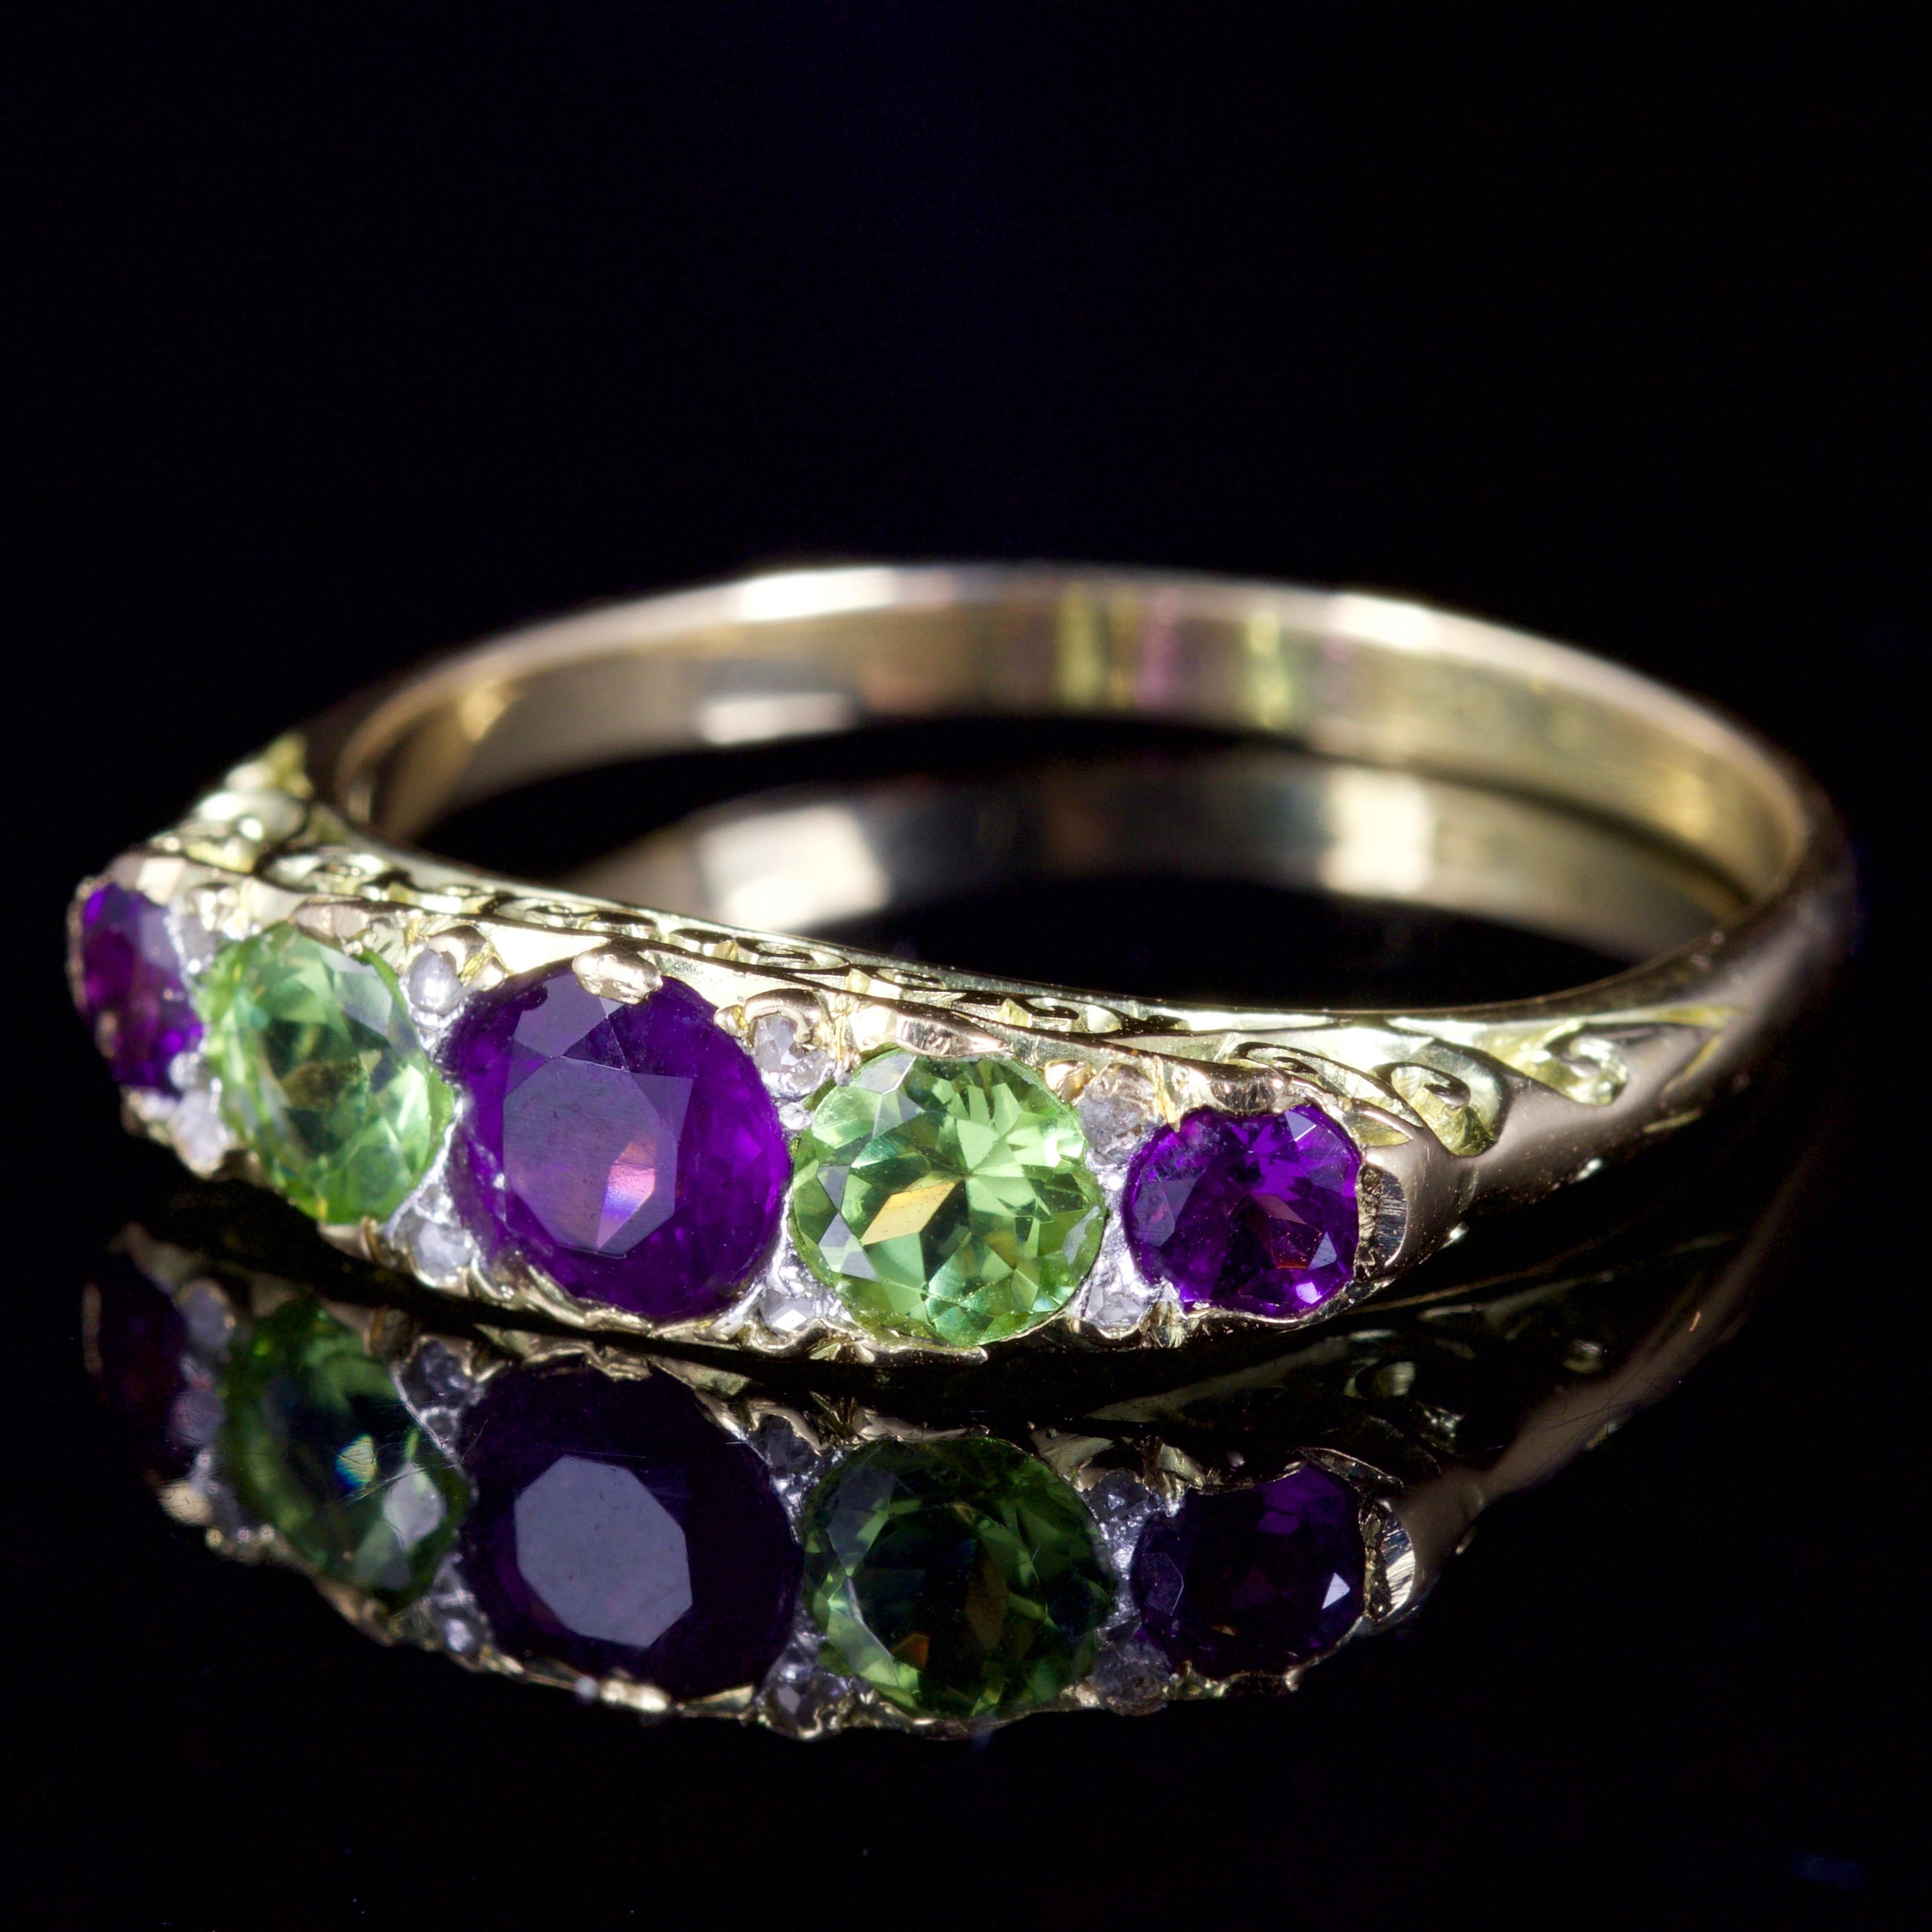 This fabulous Victorian Suffragette ring is set in 18ct Gold, Circa 1900.

The ring boasts a beautiful combinations of Amethysts, Peridots and Diamonds.

The centre Amethyst is 0.25ct and the two outer Peridots are both 0.20ct.

The wonderful